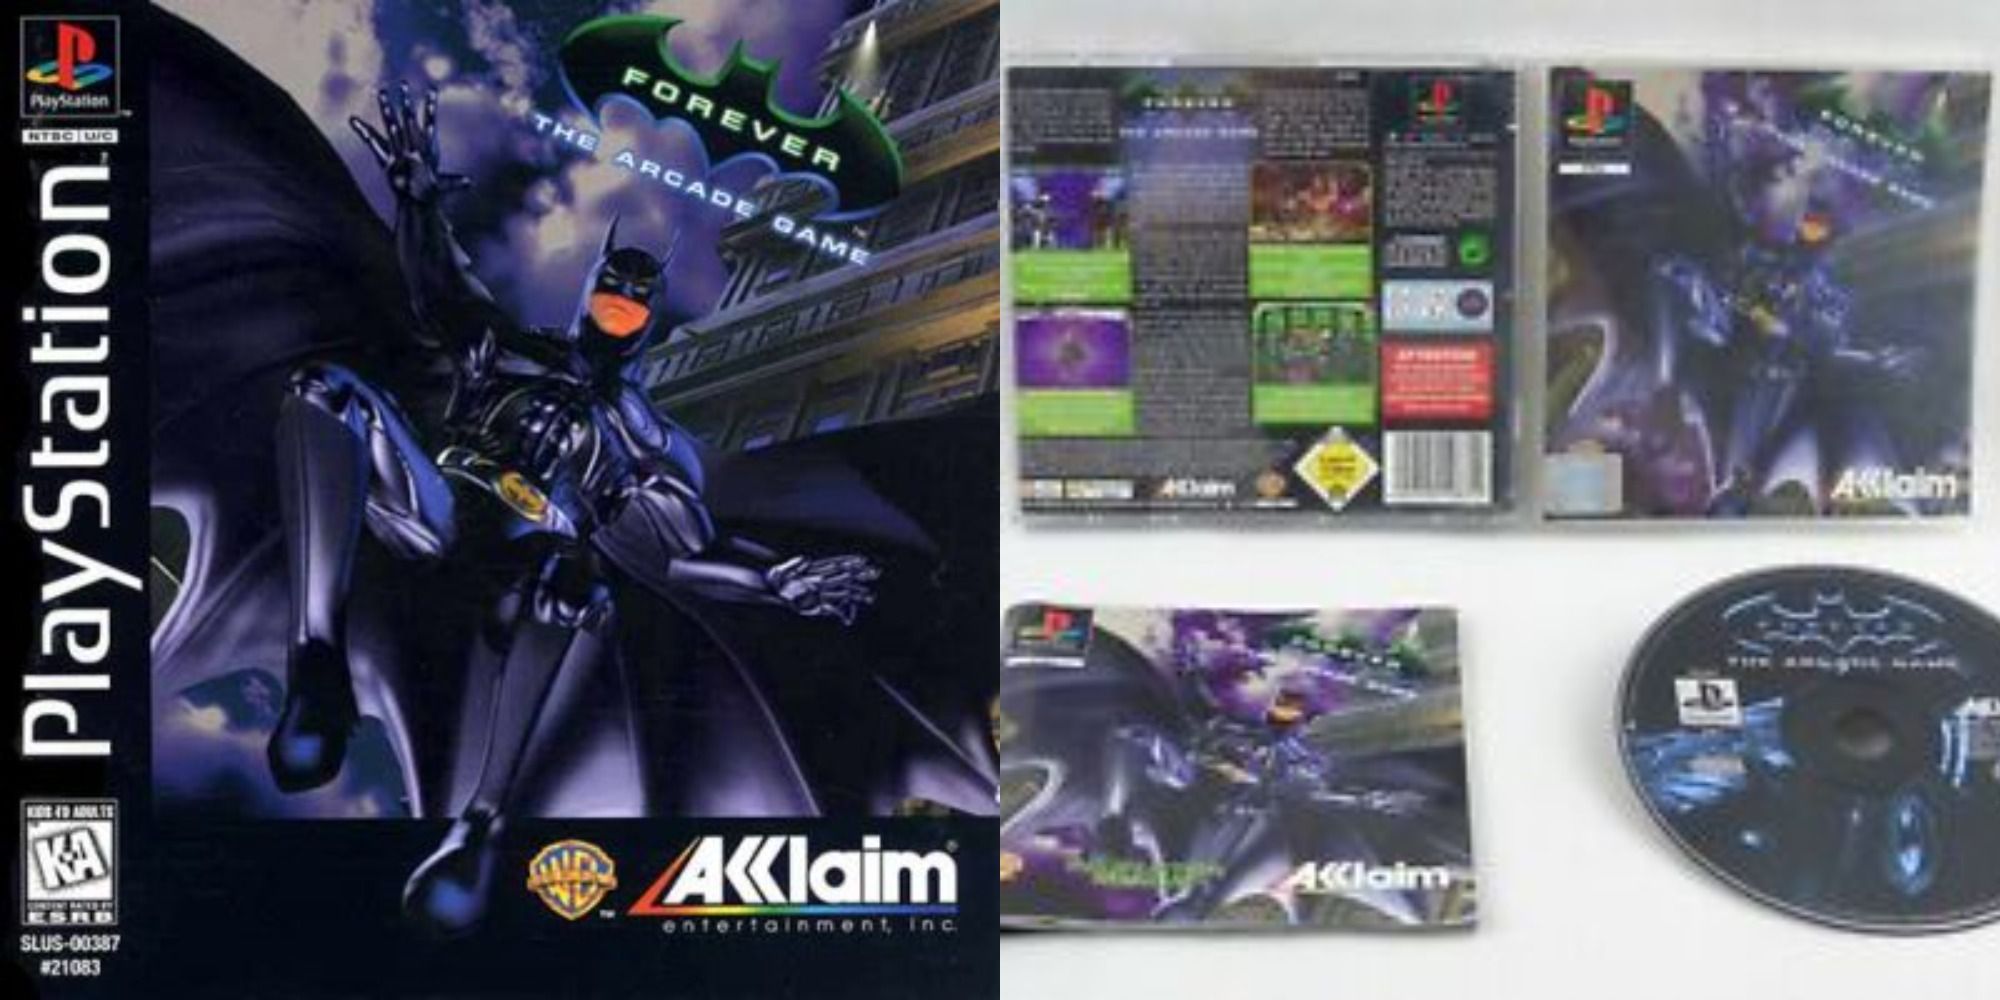 Batman Forever Arcade for the PS1